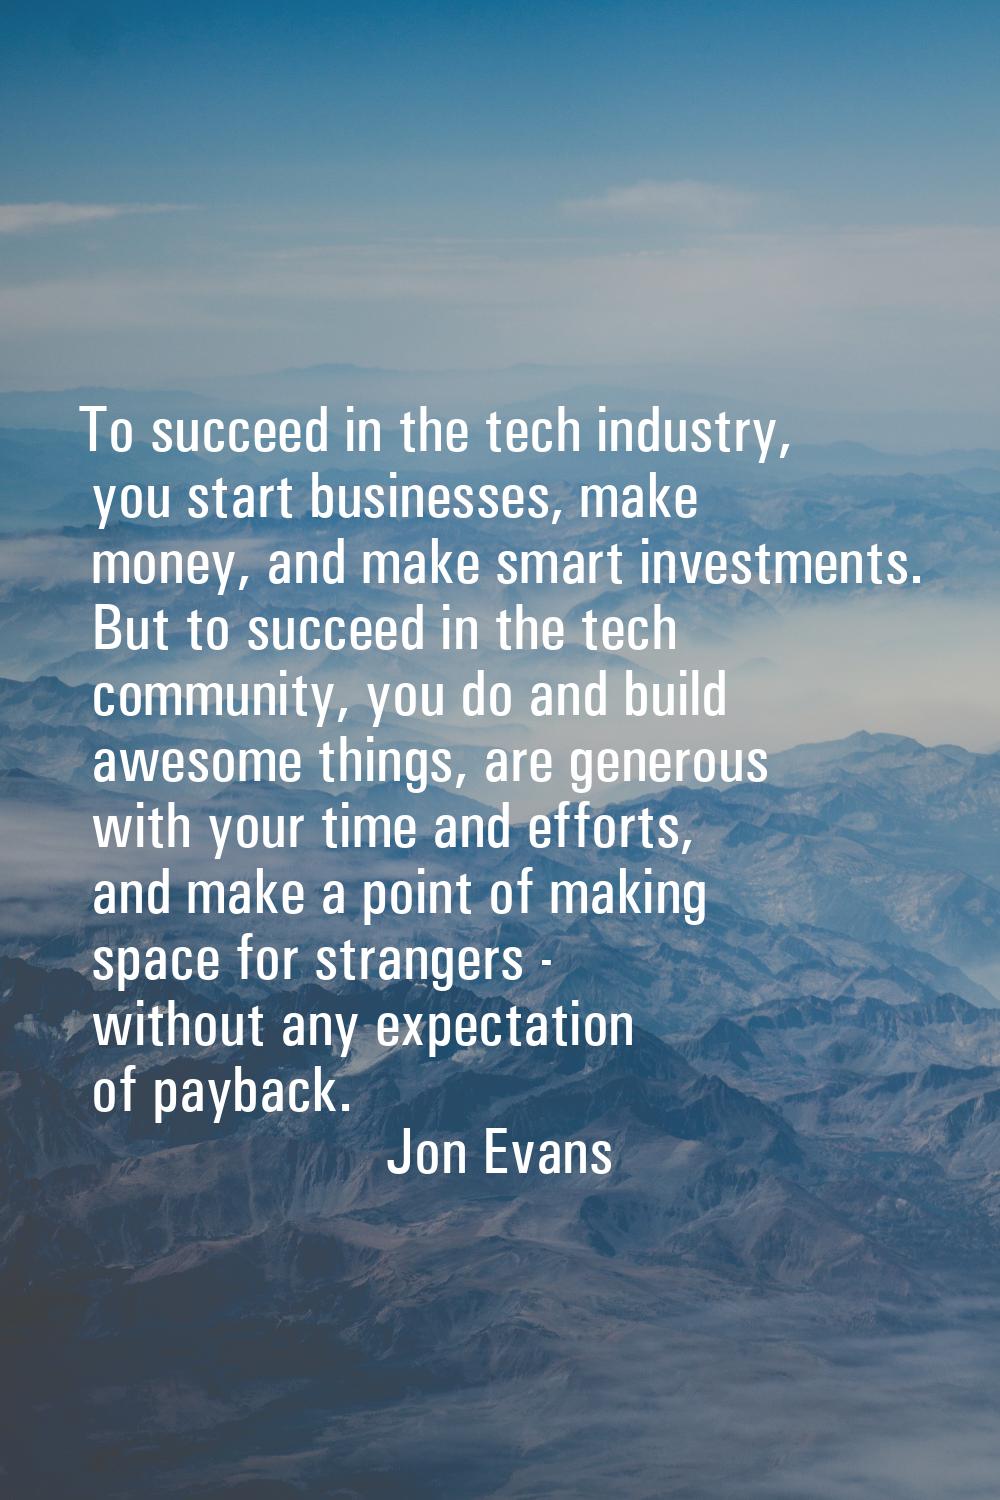 To succeed in the tech industry, you start businesses, make money, and make smart investments. But 